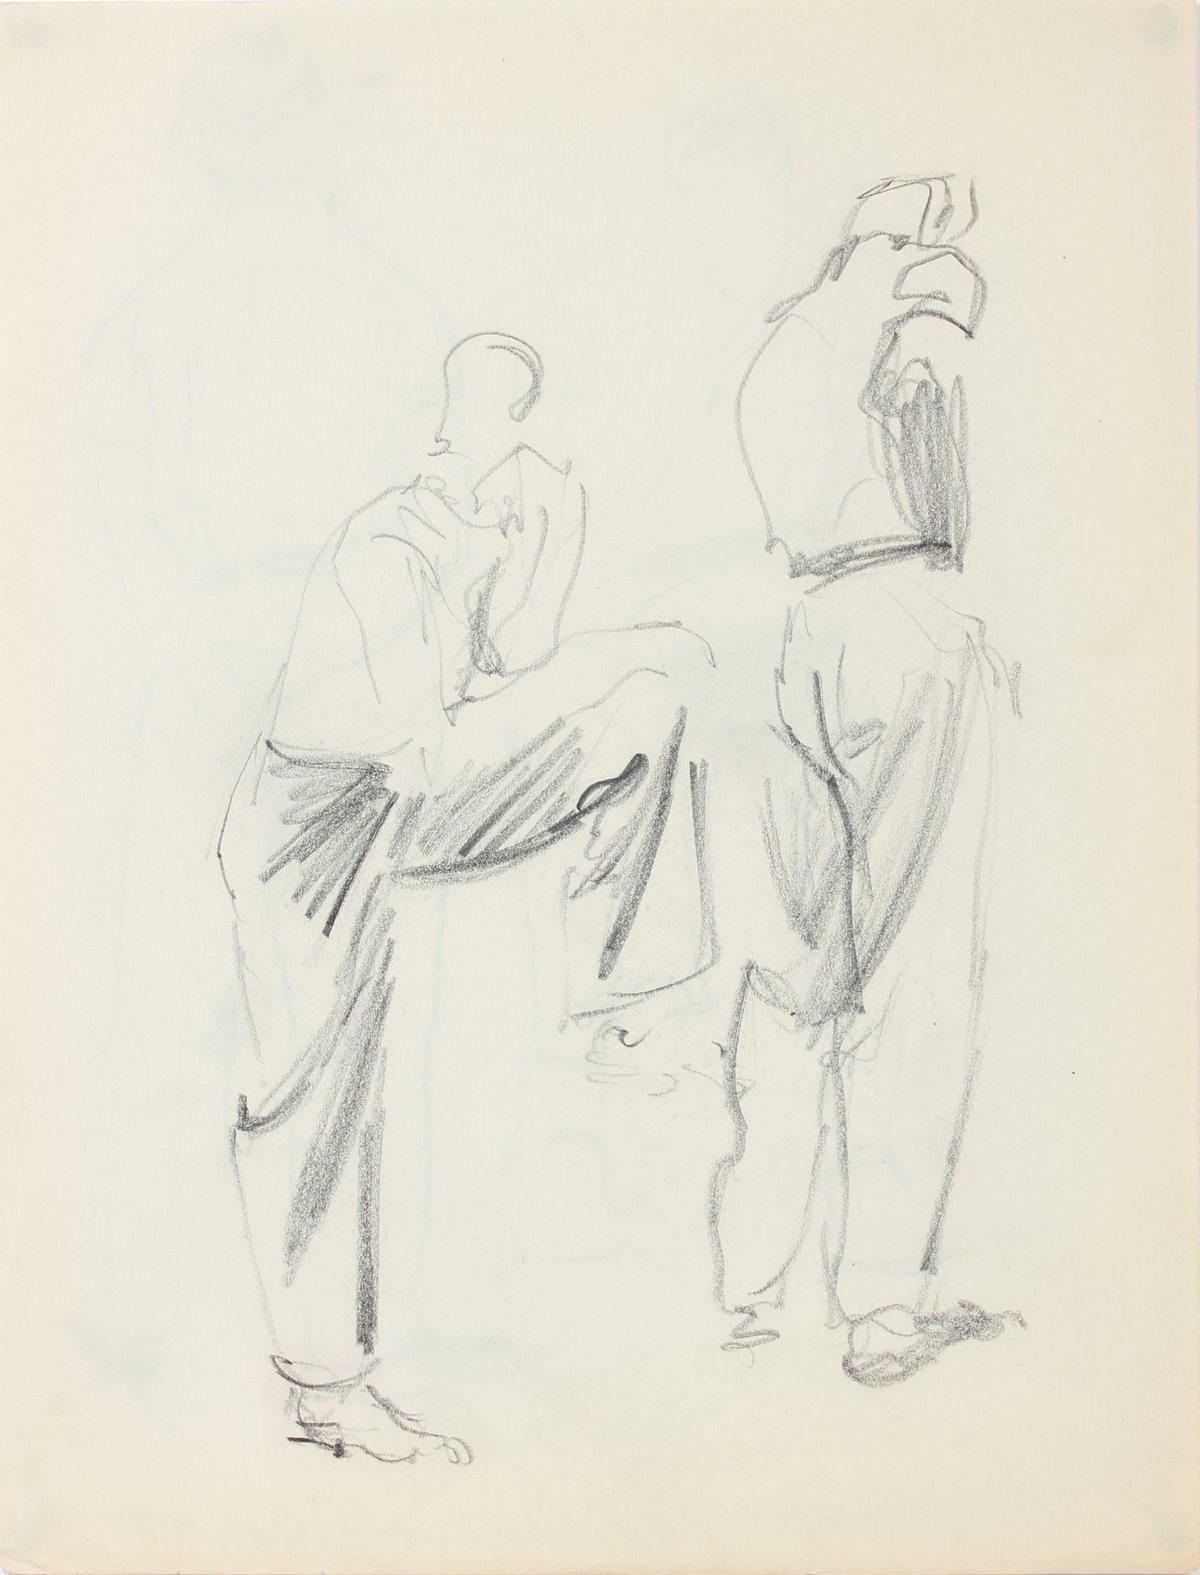 Double-Sided Stylized Sketch of Two Male Figures 1940-50s Graphite